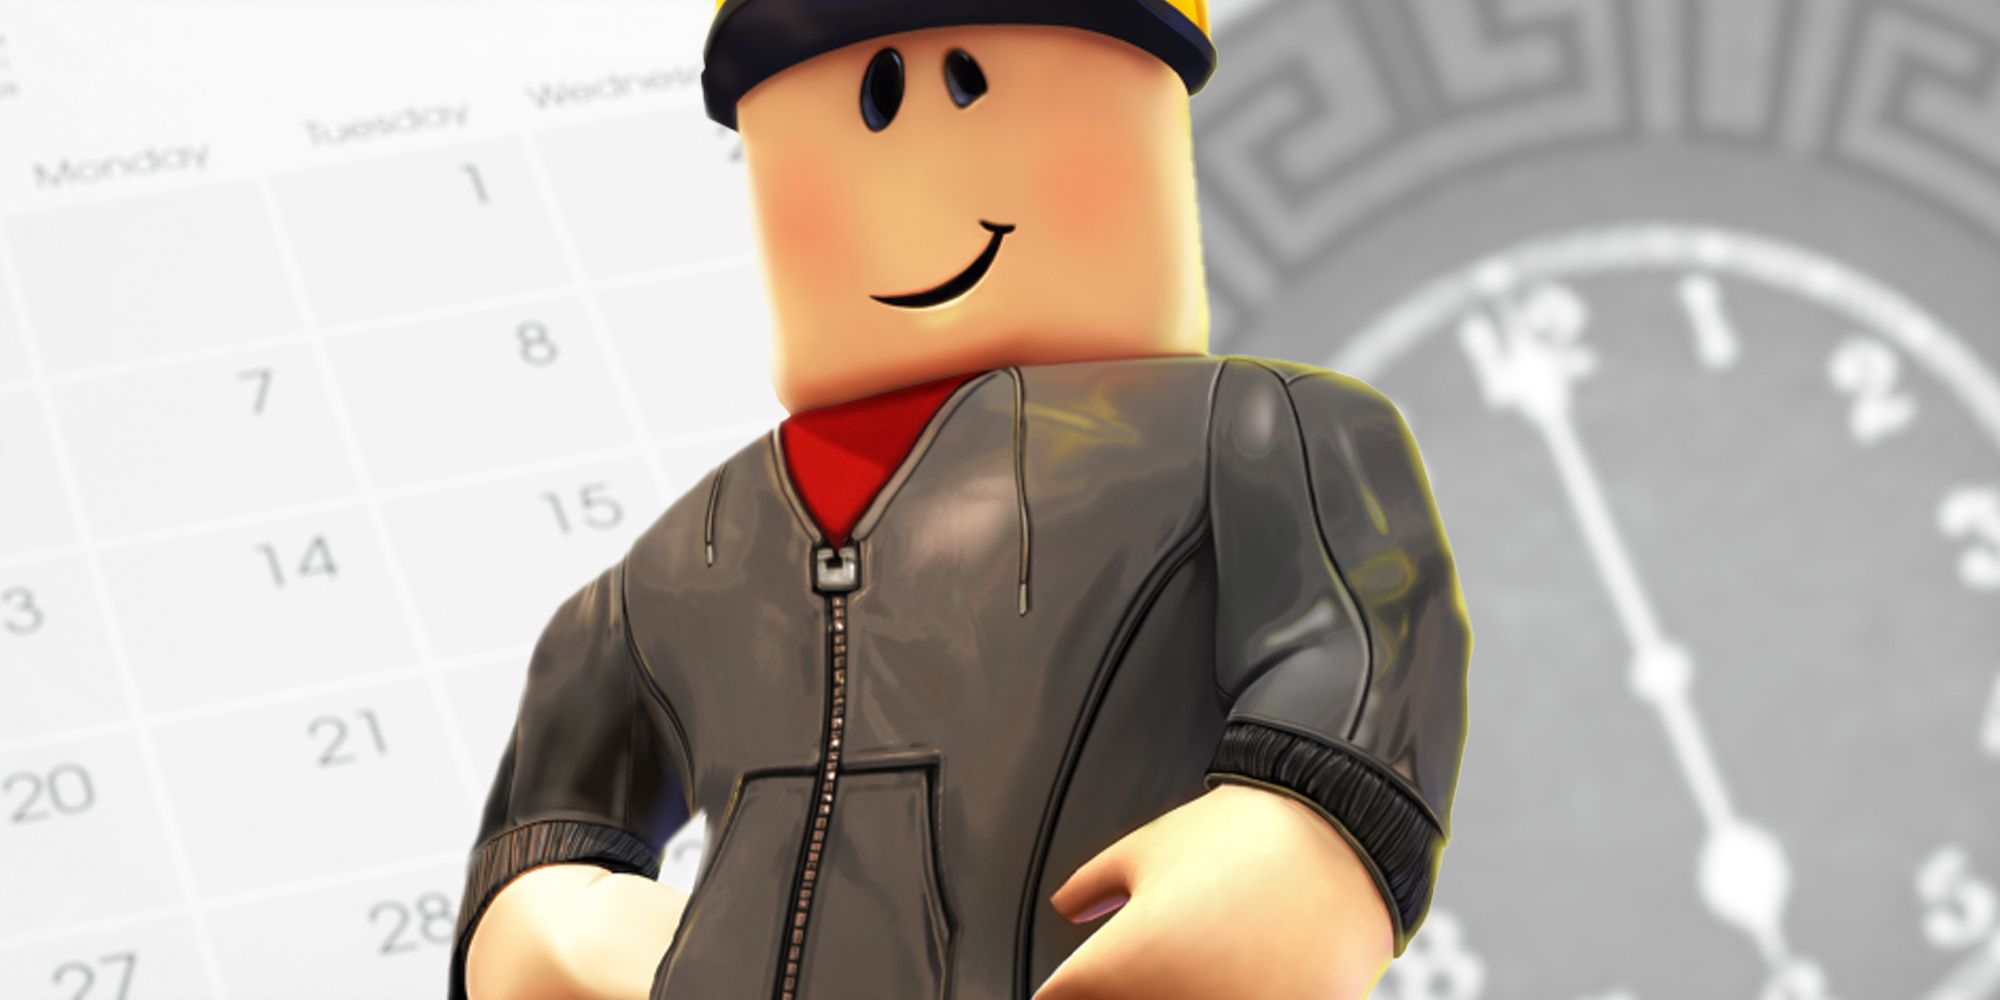 Erik.cassel was player roblox who played roblox everyday and in